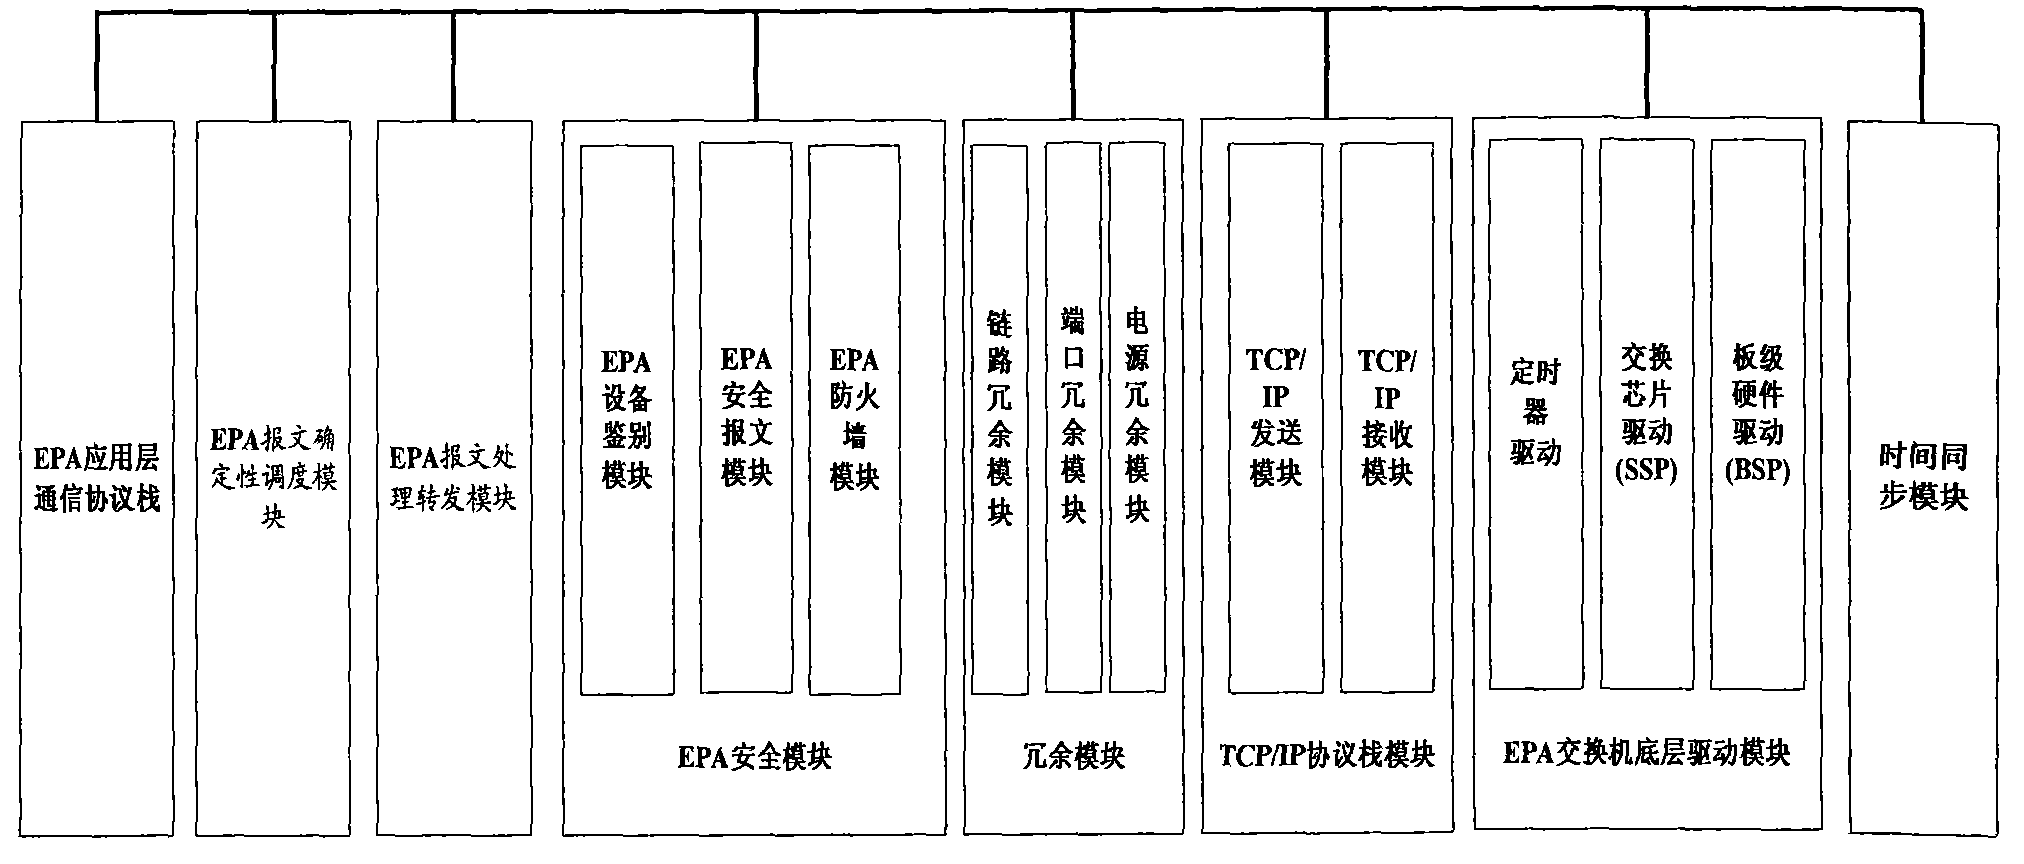 Industrial Ethernet exchanger and message forwarding method based on EPA protocol